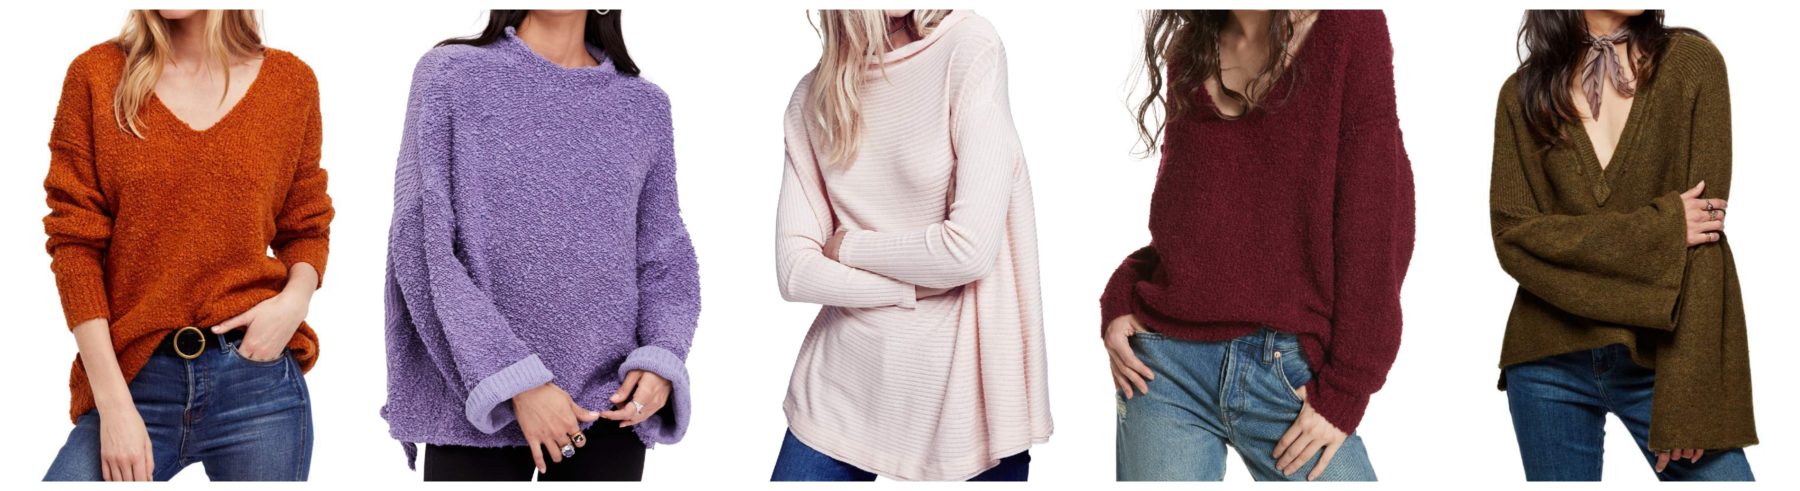 free people sweaters on sale - Best of the Weekend Sales by popular Dallas petite fashion blogger cute & little